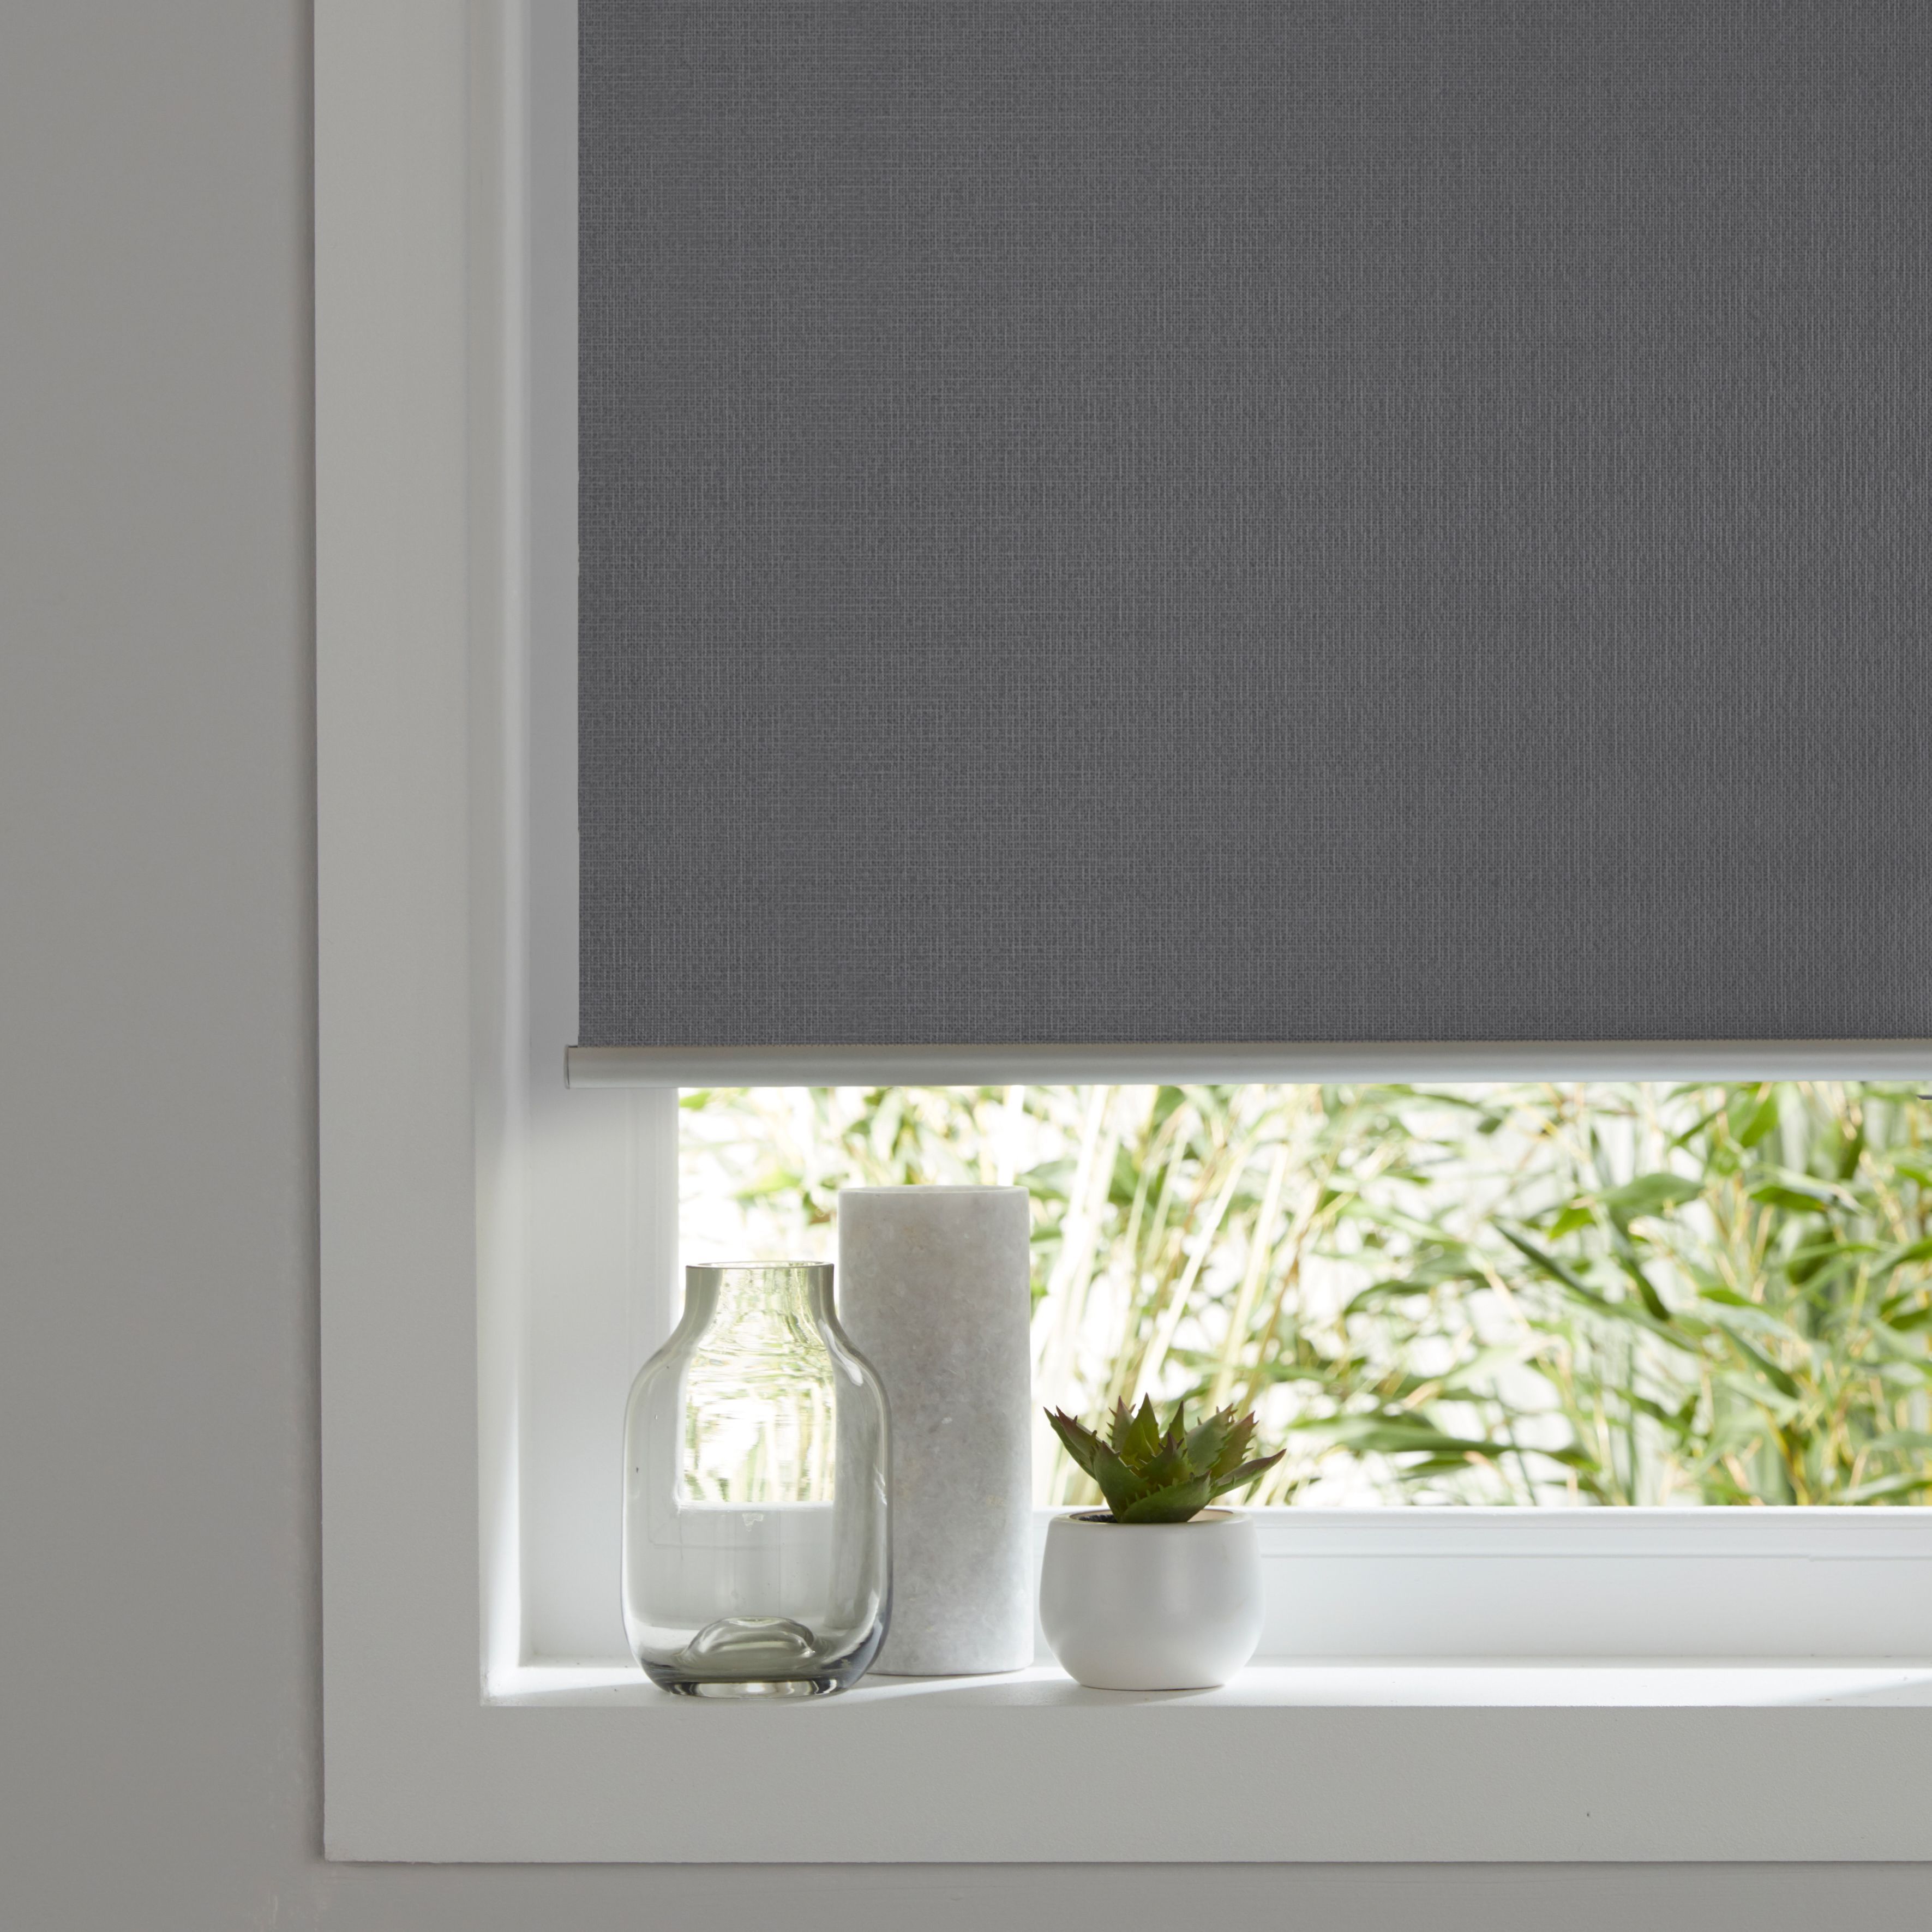 146 Scattered Buttercups Grey Roller Blind blackout FREE P&P various sizes 